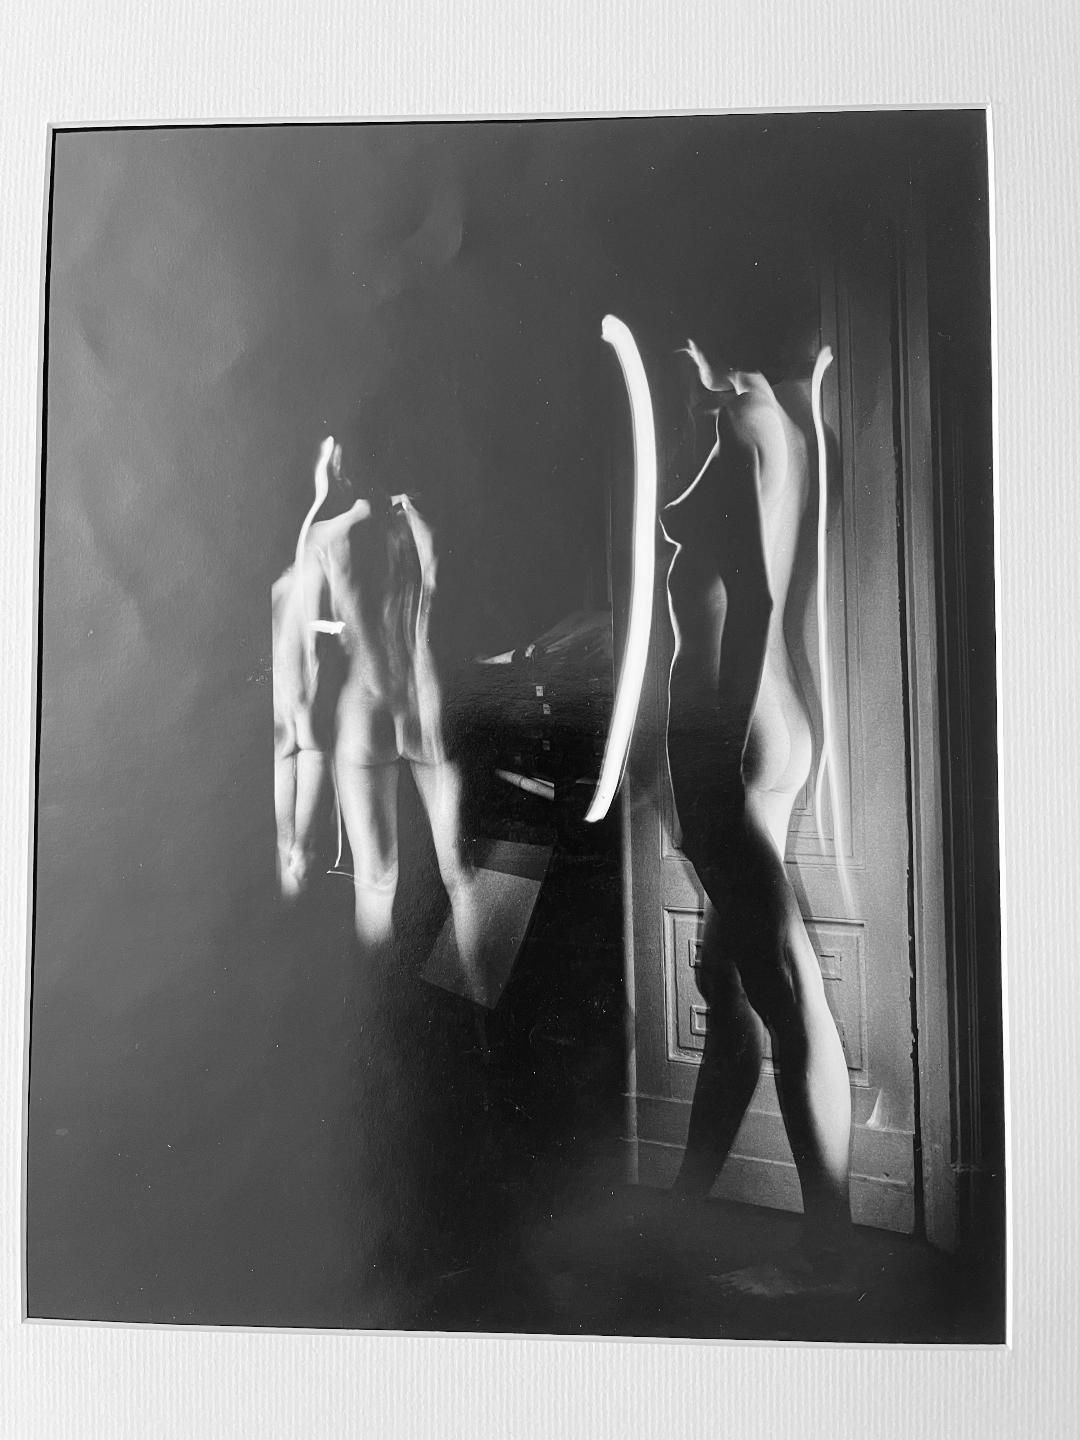 Null Richard NIETO (1952)

Nudes, circa 1985

Vintage silver print signed on the&hellip;